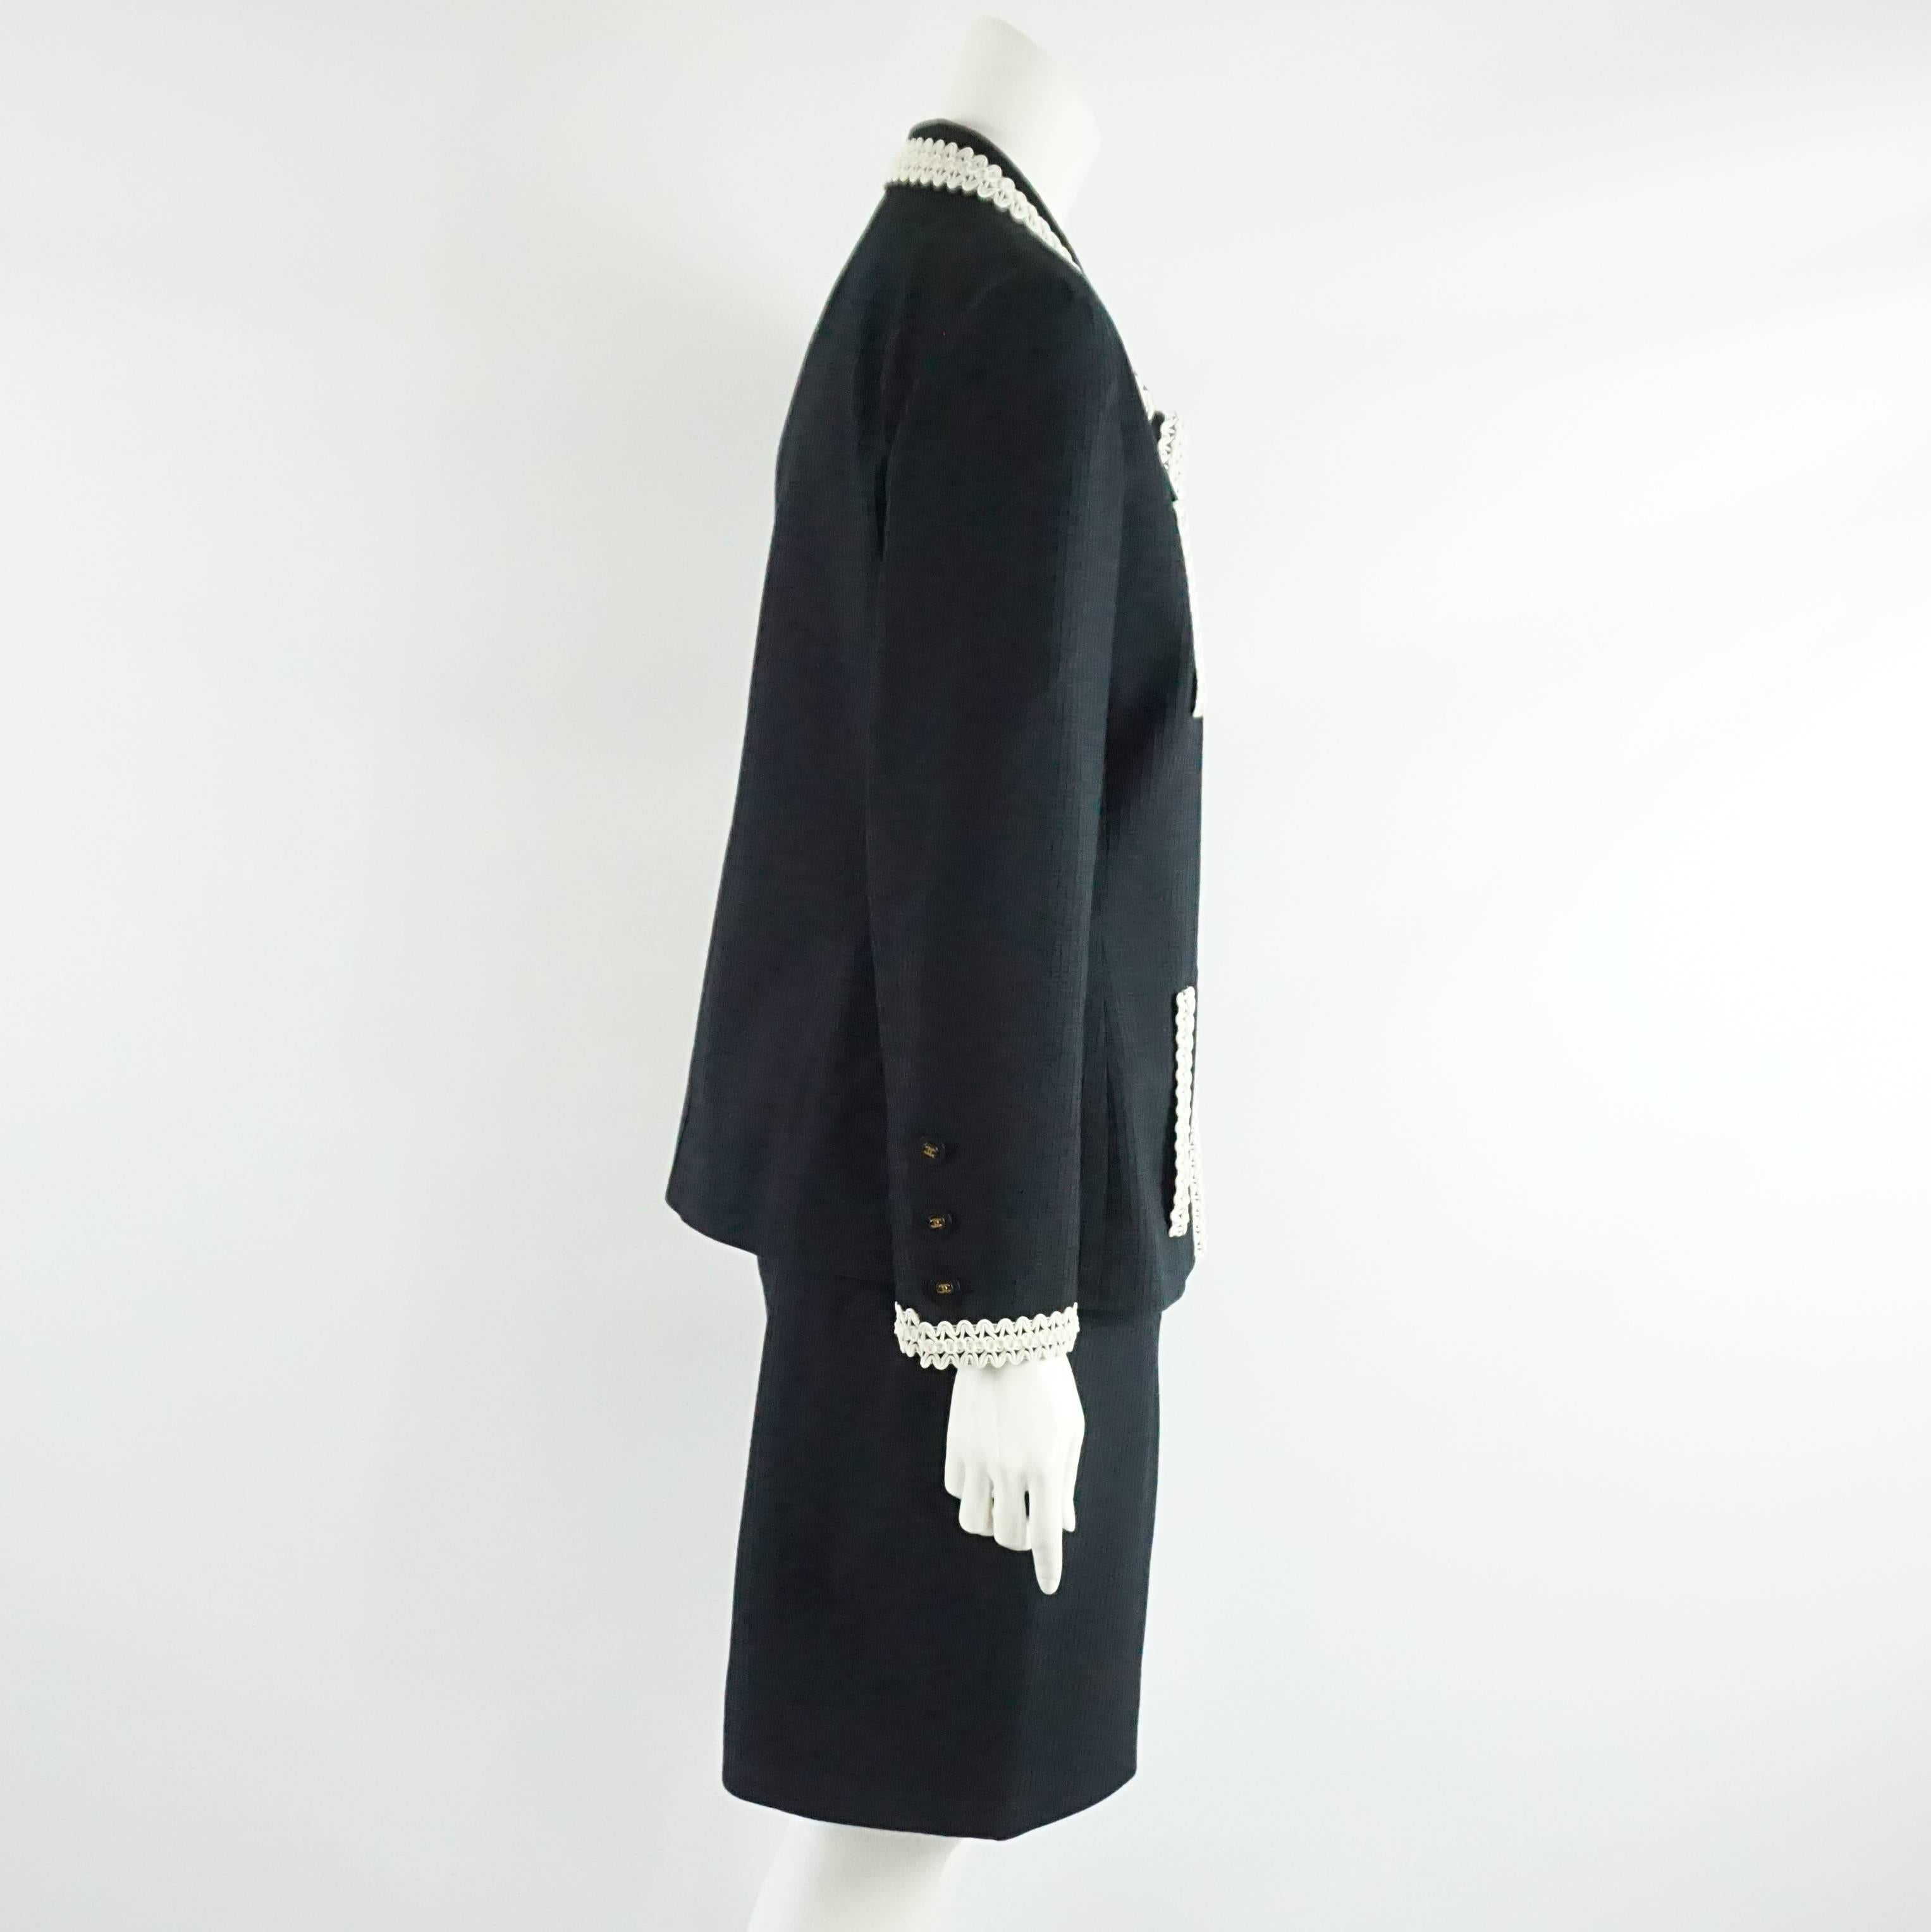 Chanel Navy Textured Cotton Skirt Suit with White Vinyl/PVC Lace Trim Detail - 42 - 94P  This very unusual and spectacular looking vintage skirt suit has a very unique white vinyl lace looking trim along the collar, the front, the sleeves and the 4